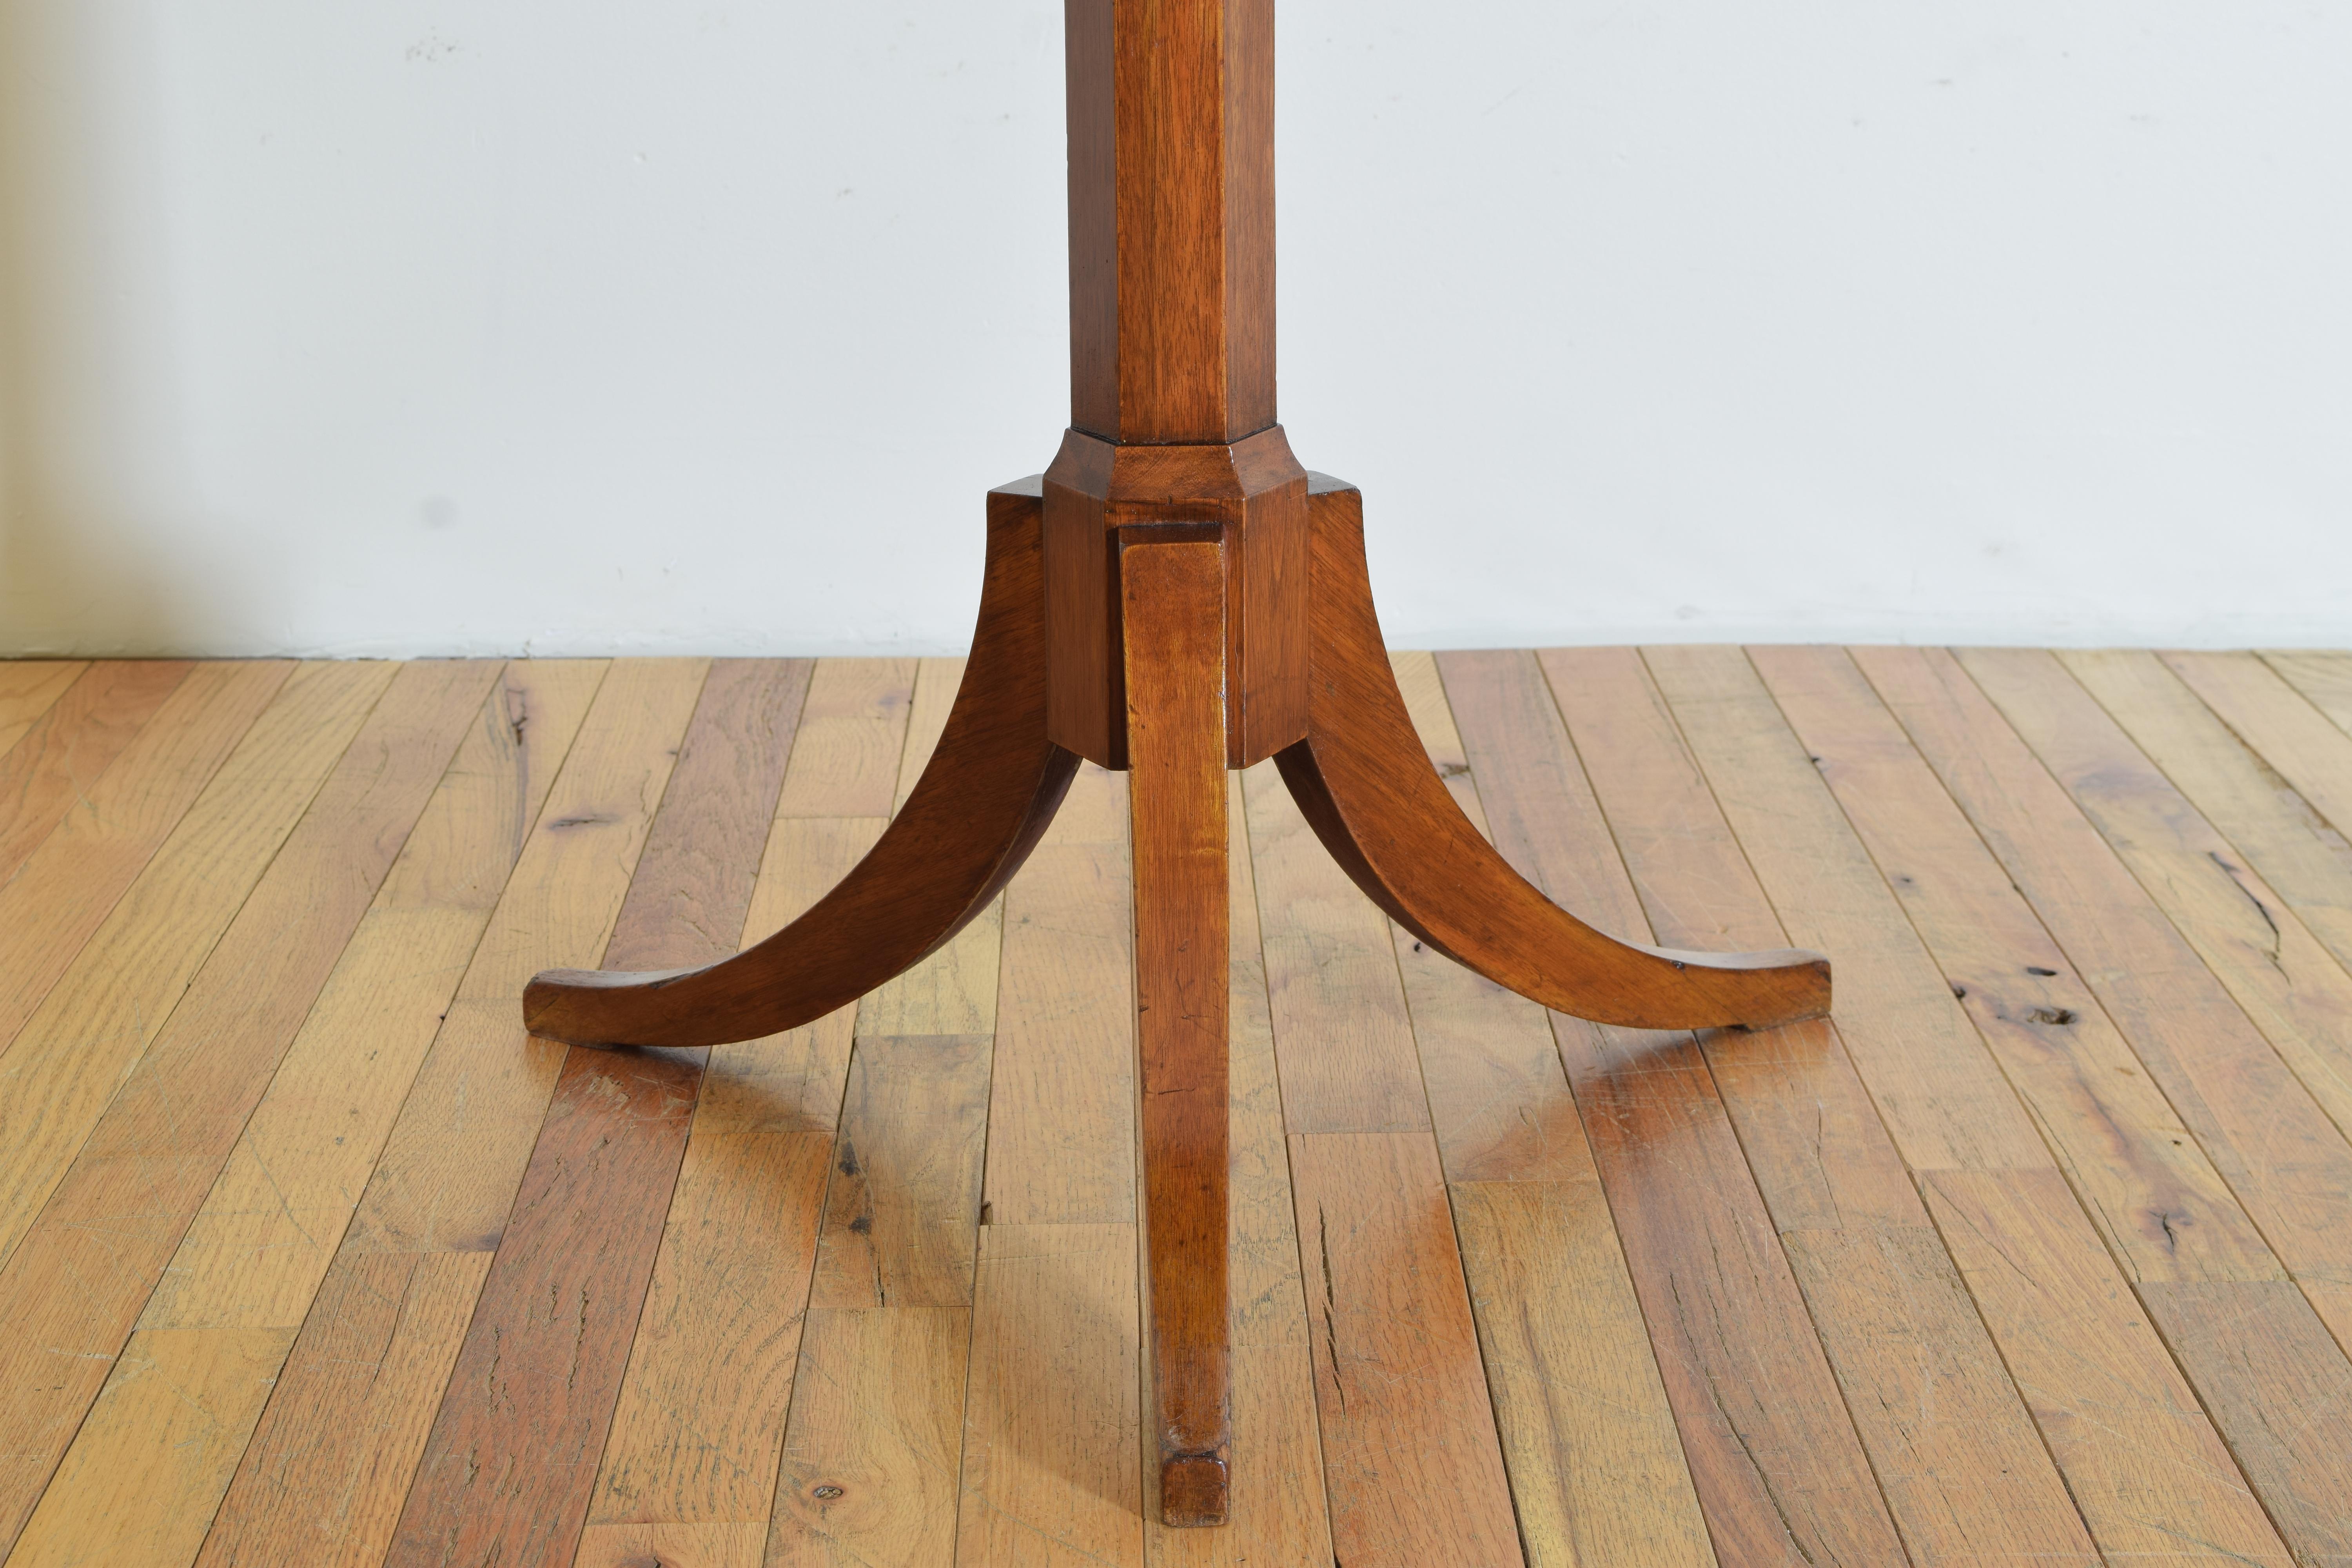 Swedish Galleried Swivel Work Table in Maple and Walnut, ca. 1887 For Sale 5